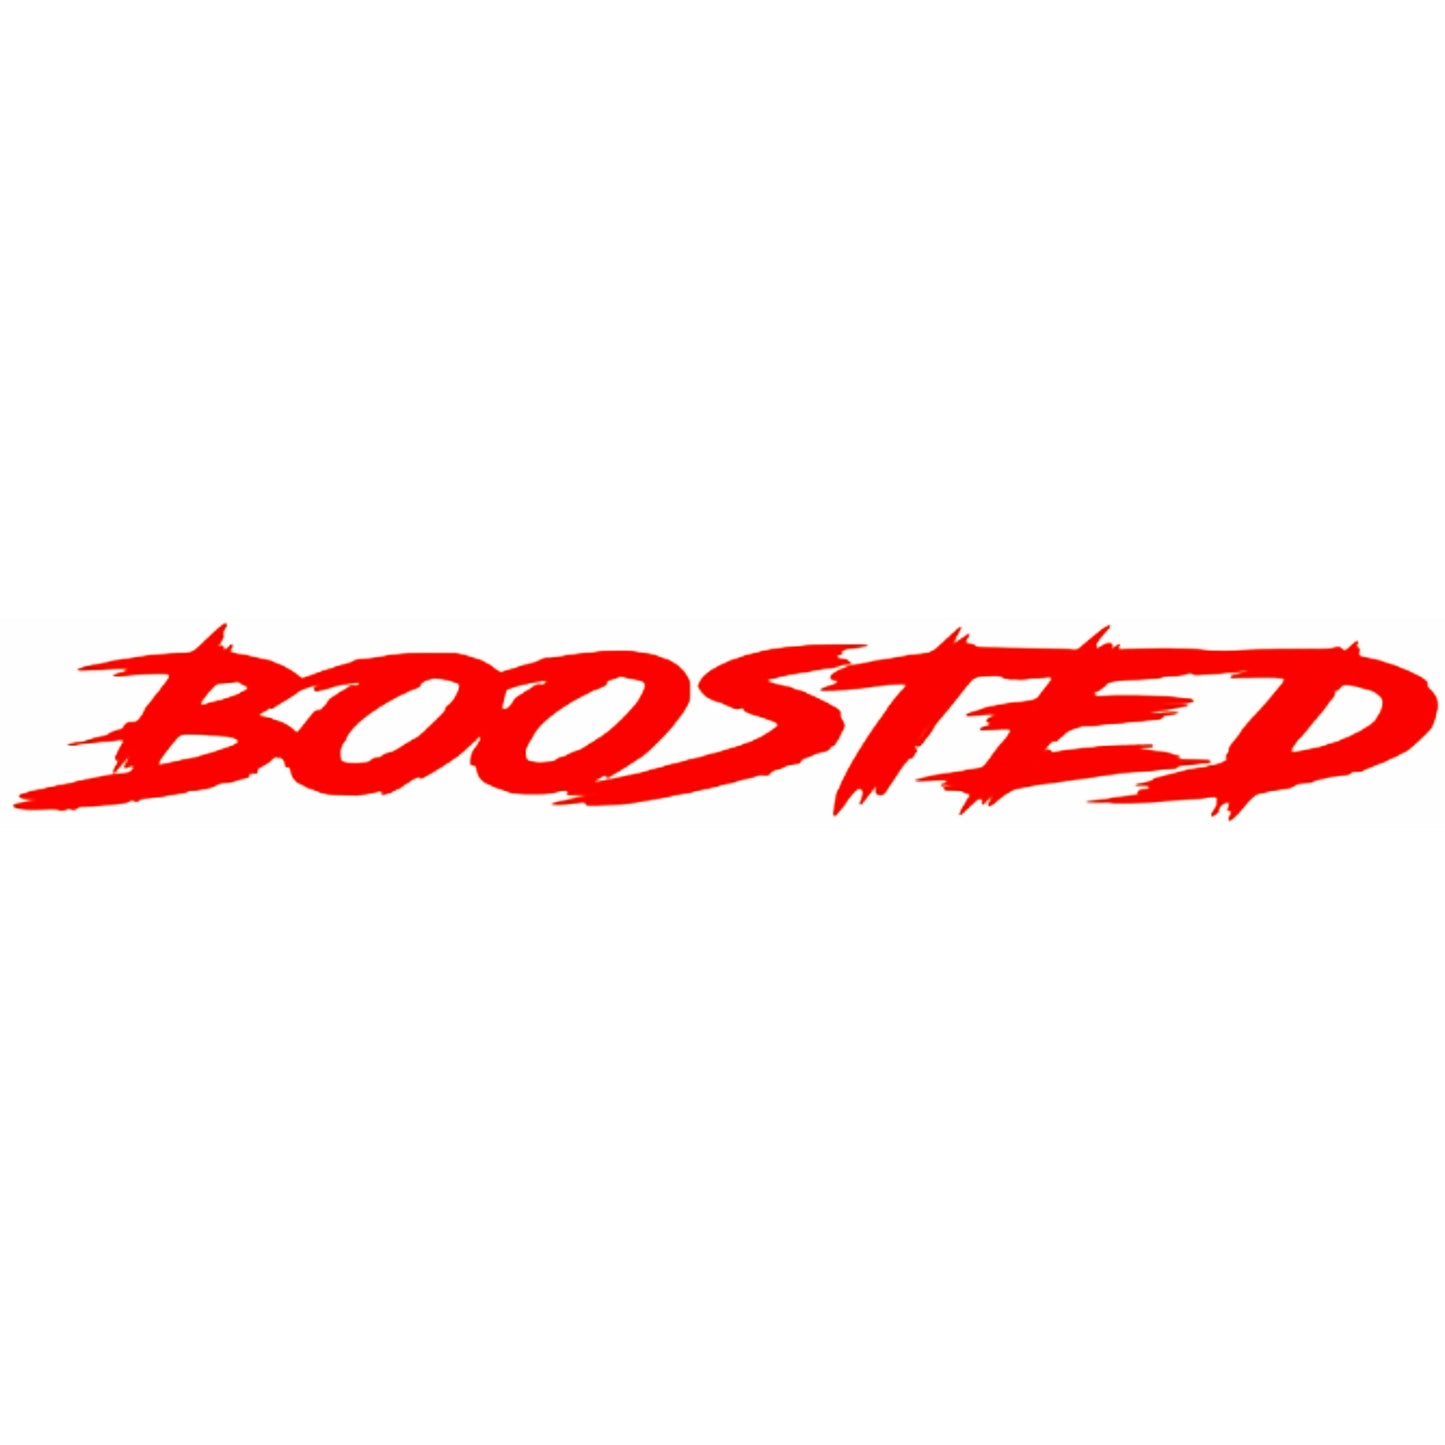 BOOSTED WINDSHIELD DECALS